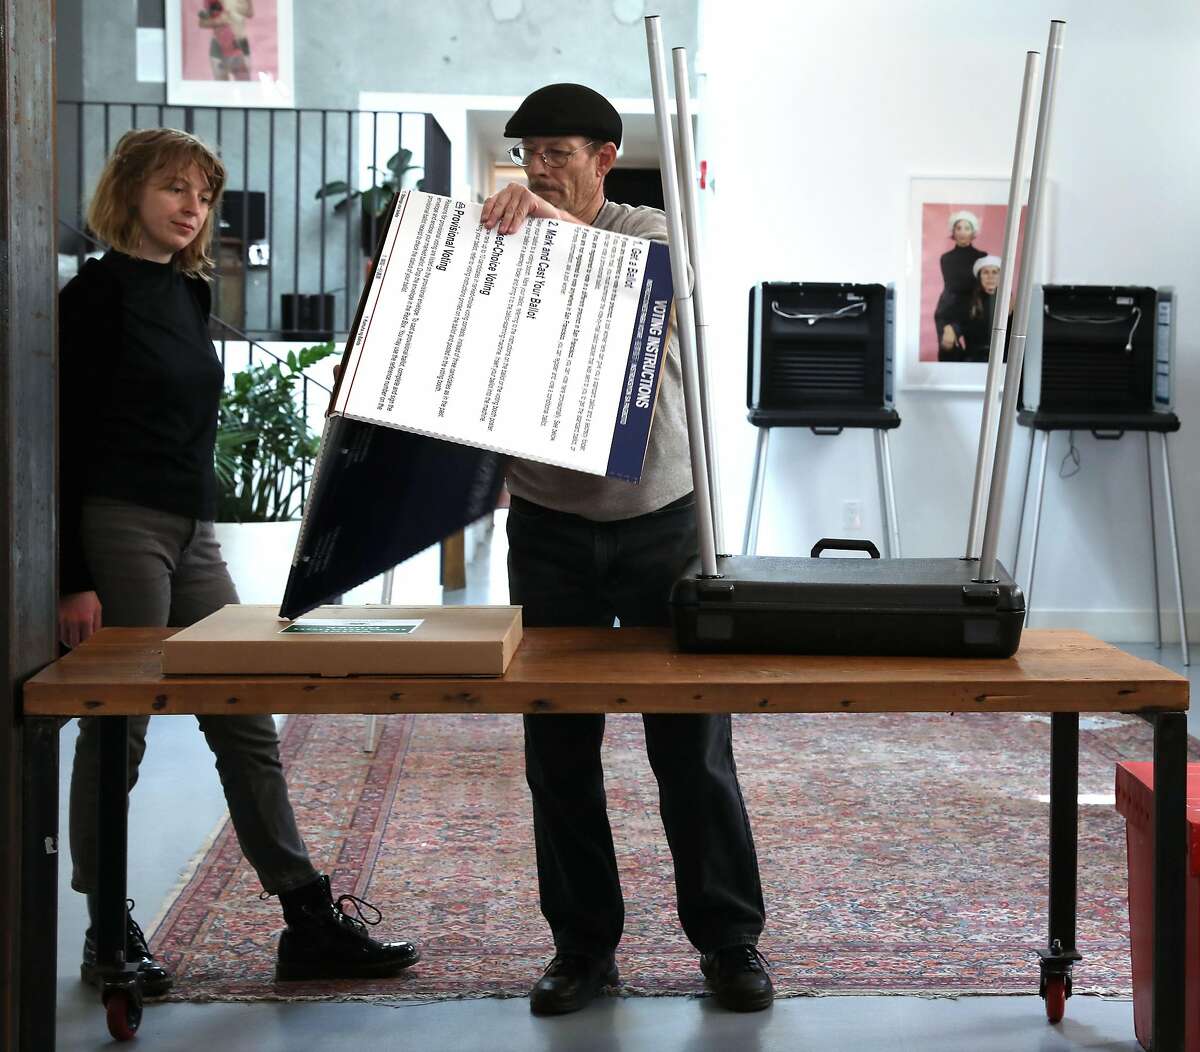 The Laundry manager Taylor Ovca (left) works with roving district support team supervisor Bill Delaney (middle) as he sets up a polling space at the coffee shop/gallery on Monday, March 2, 2020, in San Francisco, Calif.